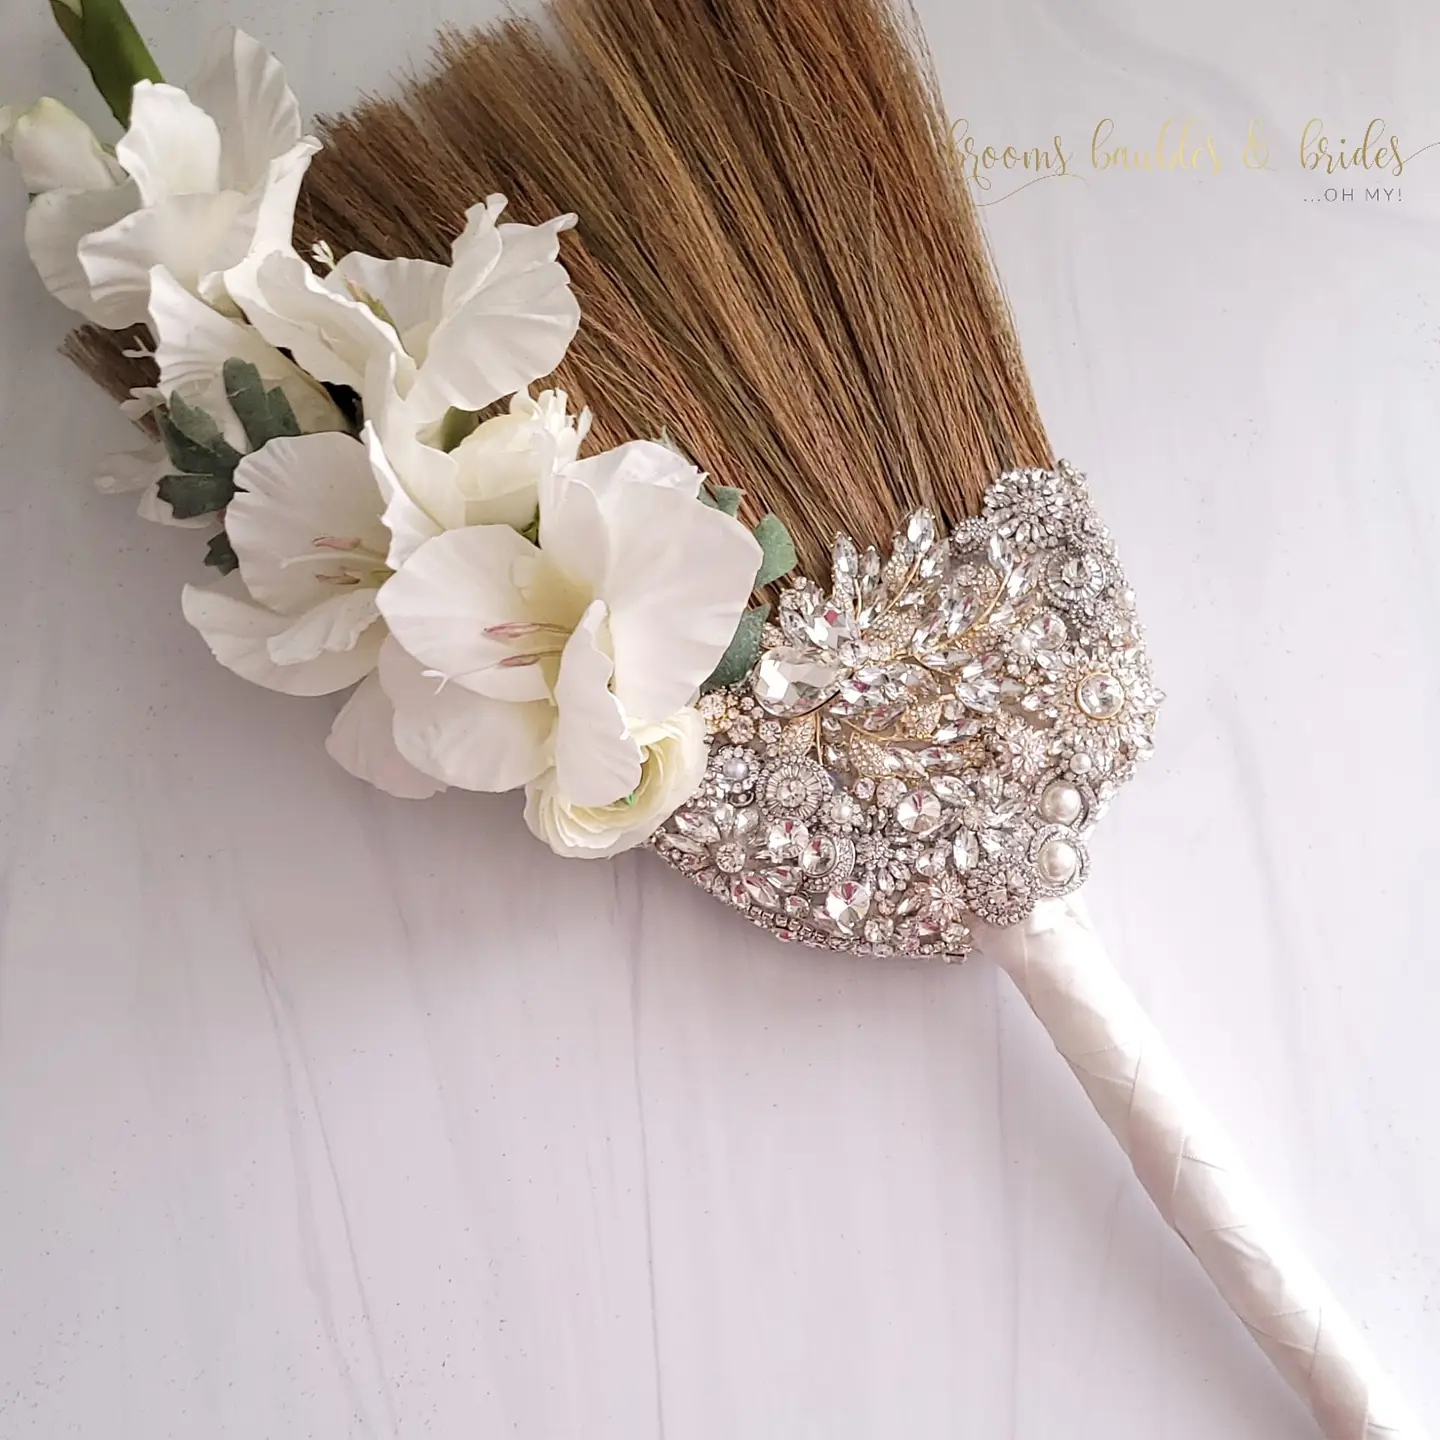 The logo or business face of "Brooms Baubles N Brides...Oh My!"